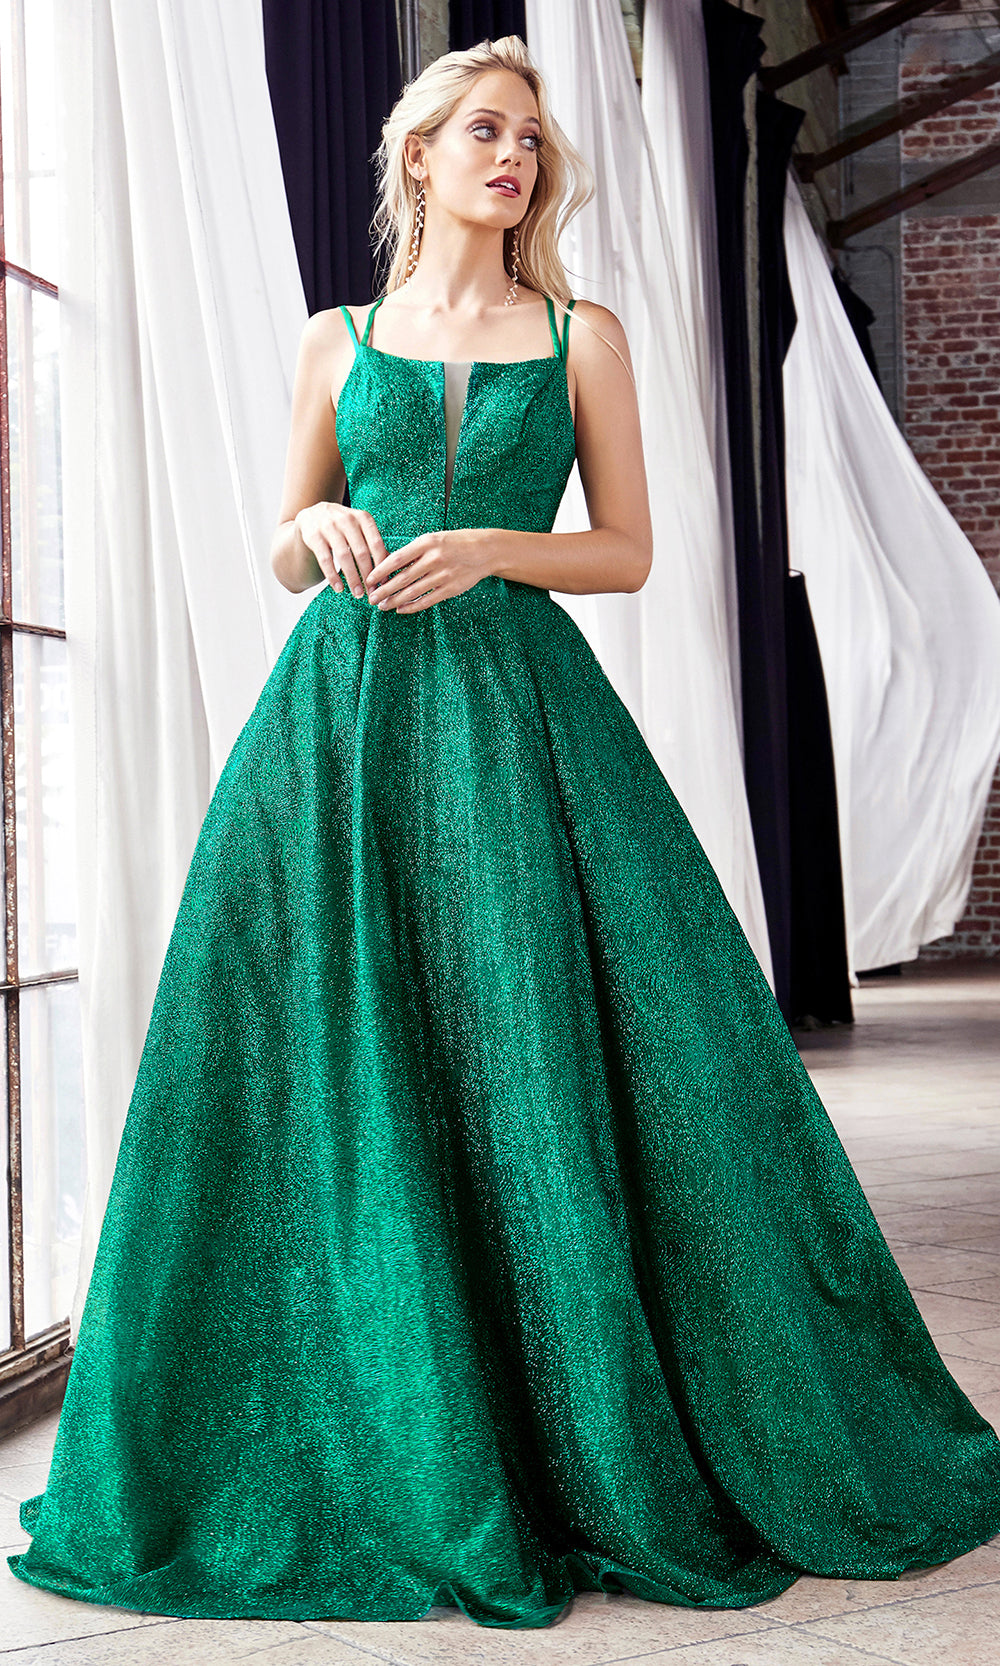 Cinderella Divine CB051 long emerald green metallic beaded dress with straps. Perfect dark green evening dress for prom, quinceanera dress, indowestern gown, prom, engagement/wedding reception, debut, sweet 16. Sweet 15.Plus sizes available.jpg